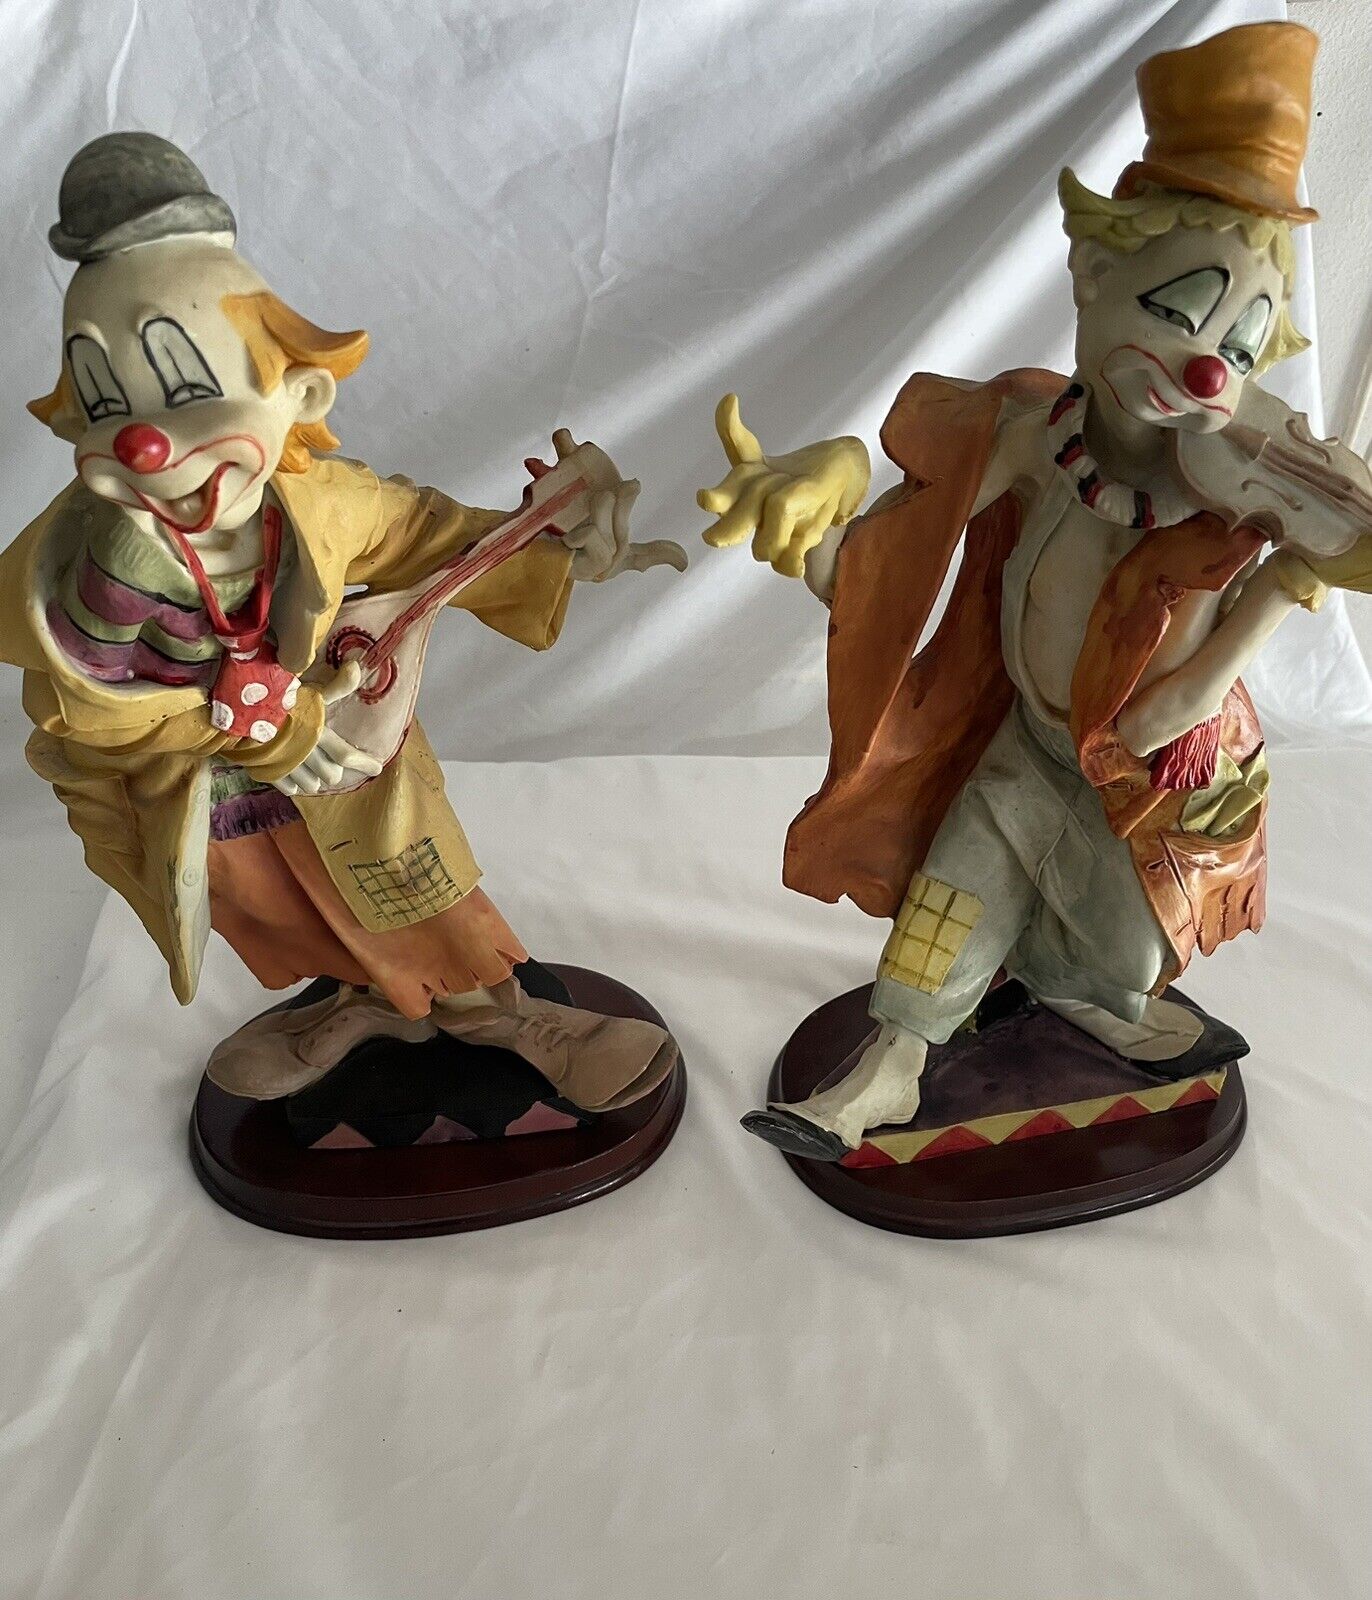 Vintage Collectible Set of 2 Ceramic Resin Clowns Playing Instruments